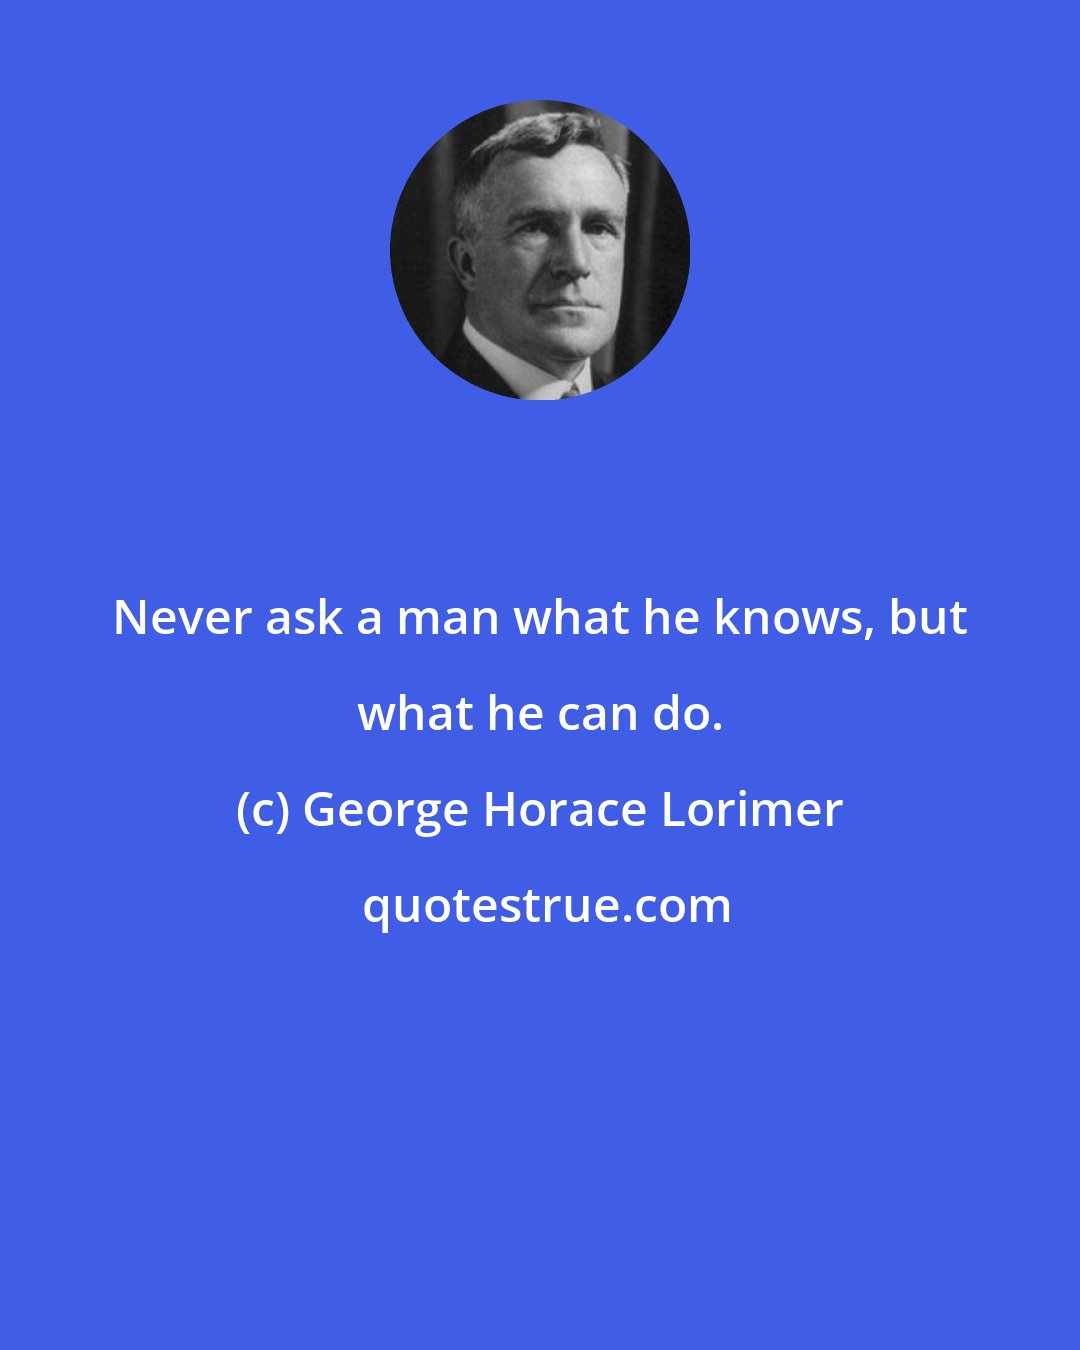 George Horace Lorimer: Never ask a man what he knows, but what he can do.